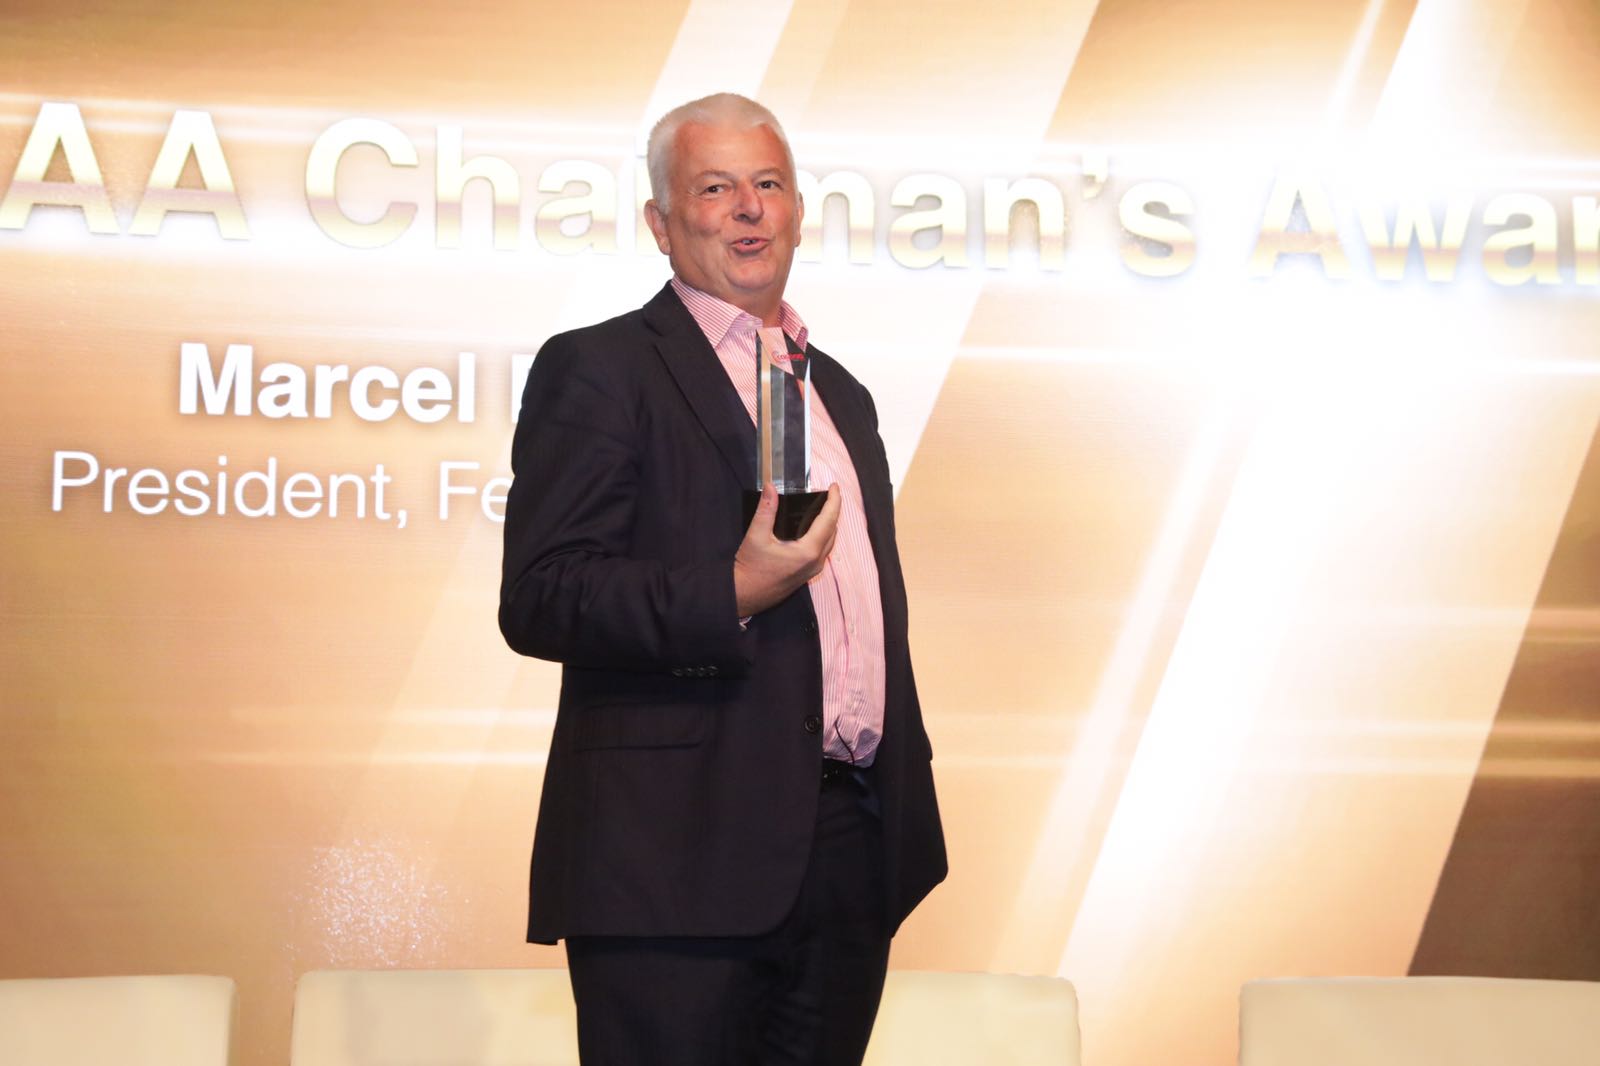 Marcel Fenez receives CASBAA Chairman’s Award 2016 at the CASBAA Convention